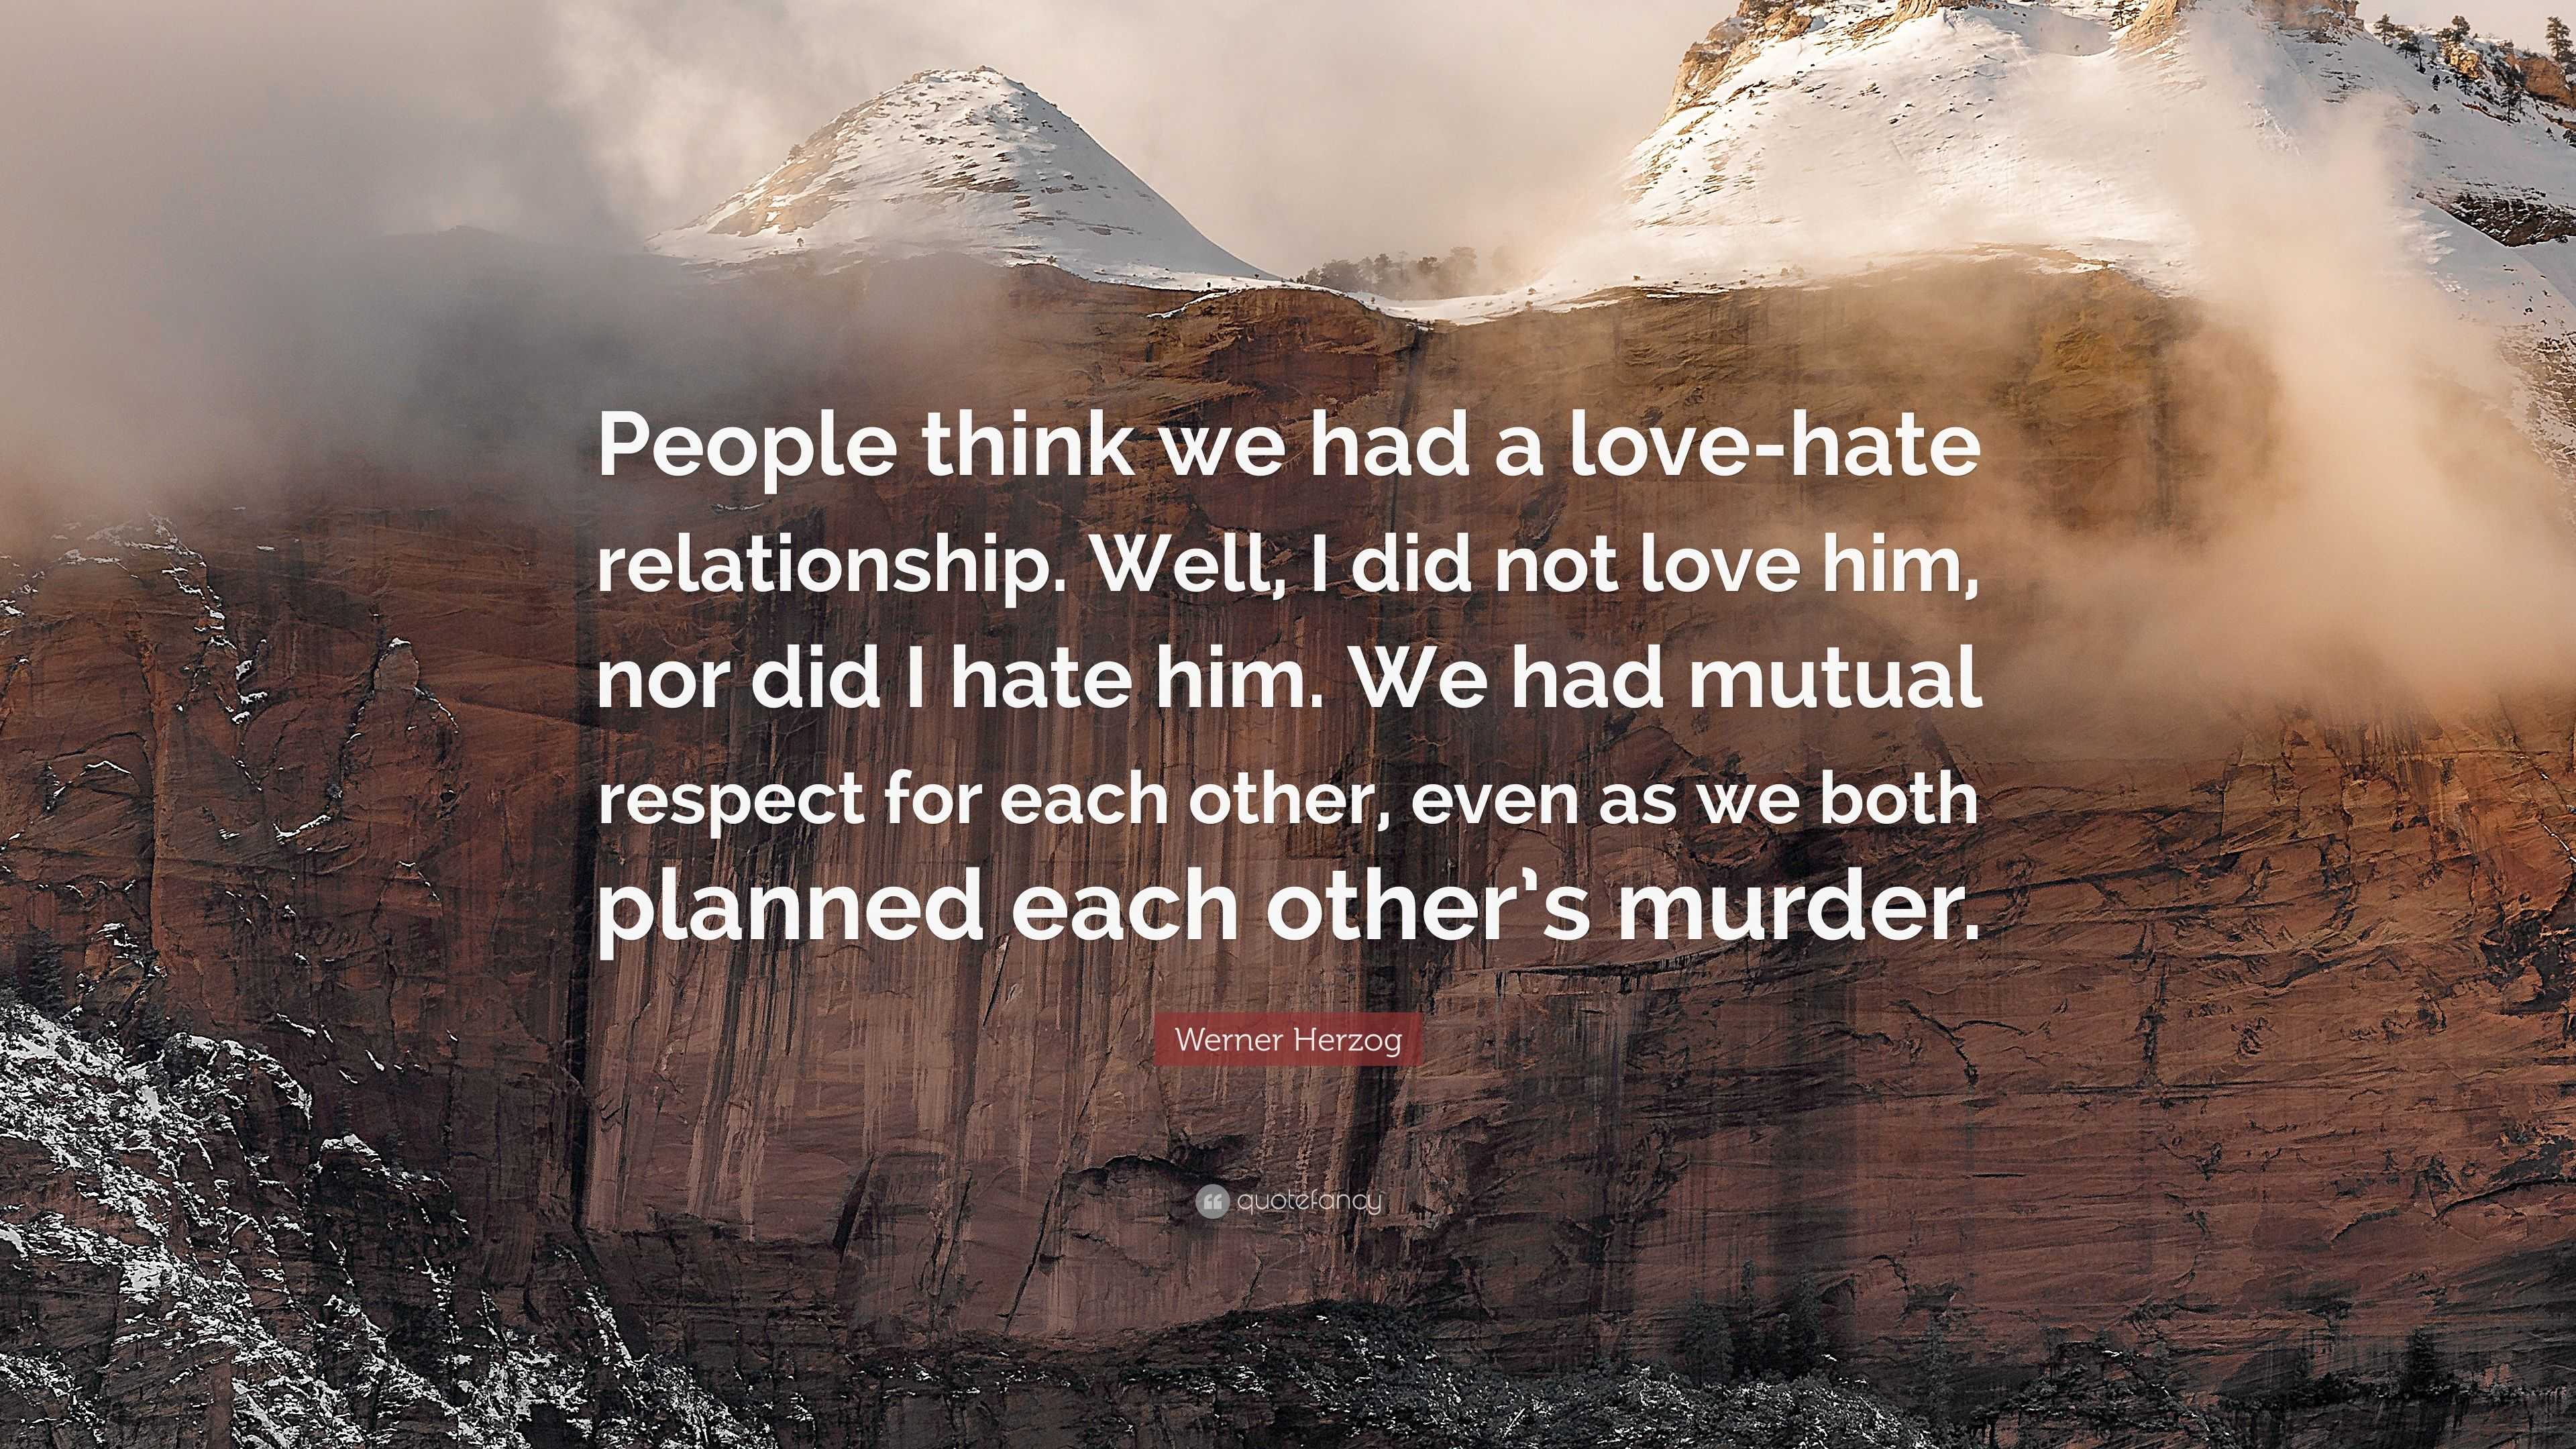 Werner Herzog Quote “People think we had a love hate relationship Well